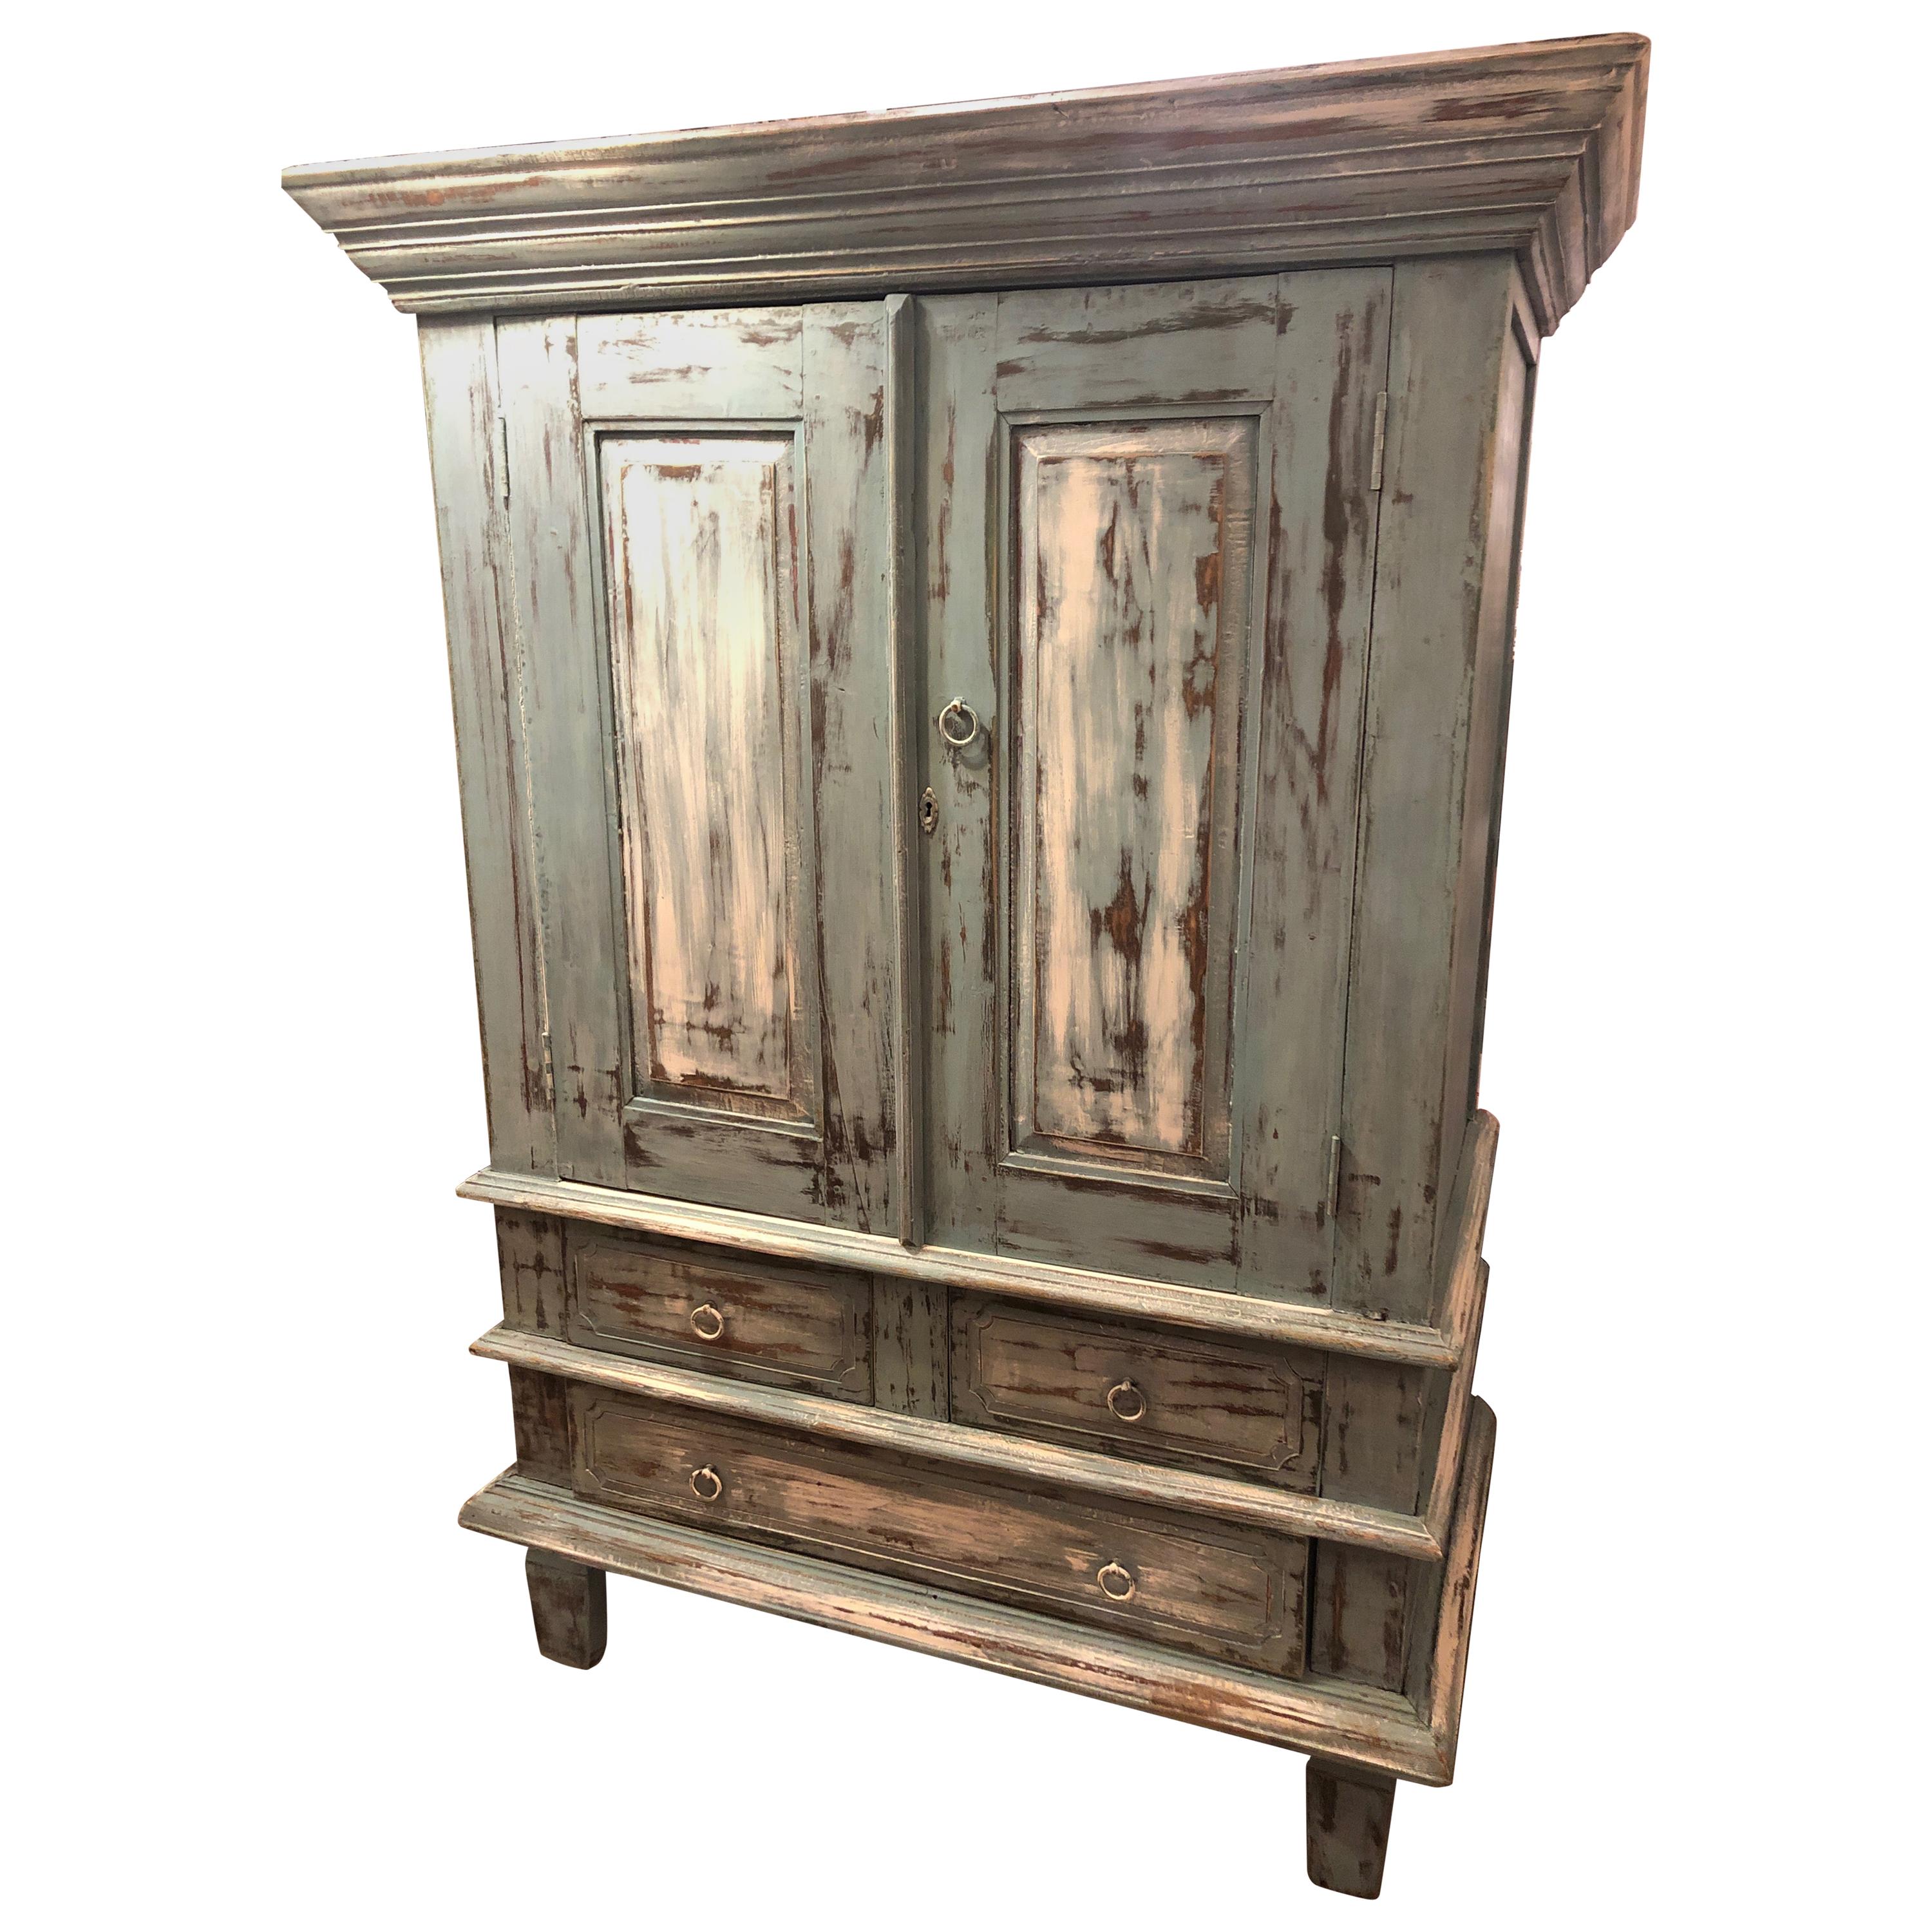 Handpainted Country Distressed Storage Cabinet Armoire